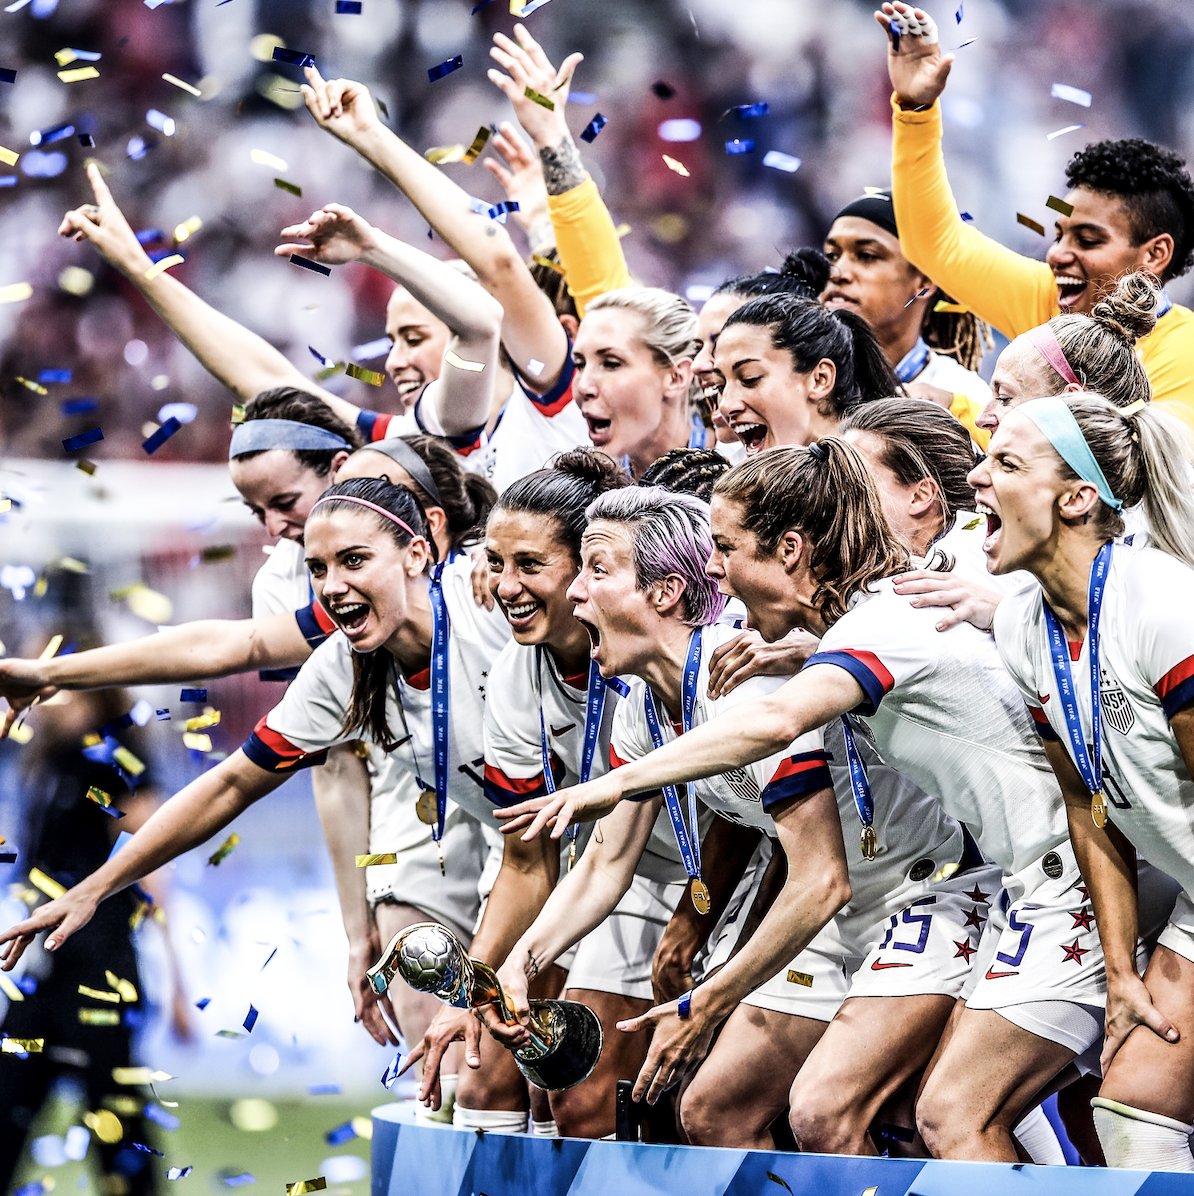 For the first time, U.S. Soccer, USWNT and USMNT have announced a new collective bargaining agreement that will guarantee equal pay, including World Cup prize money